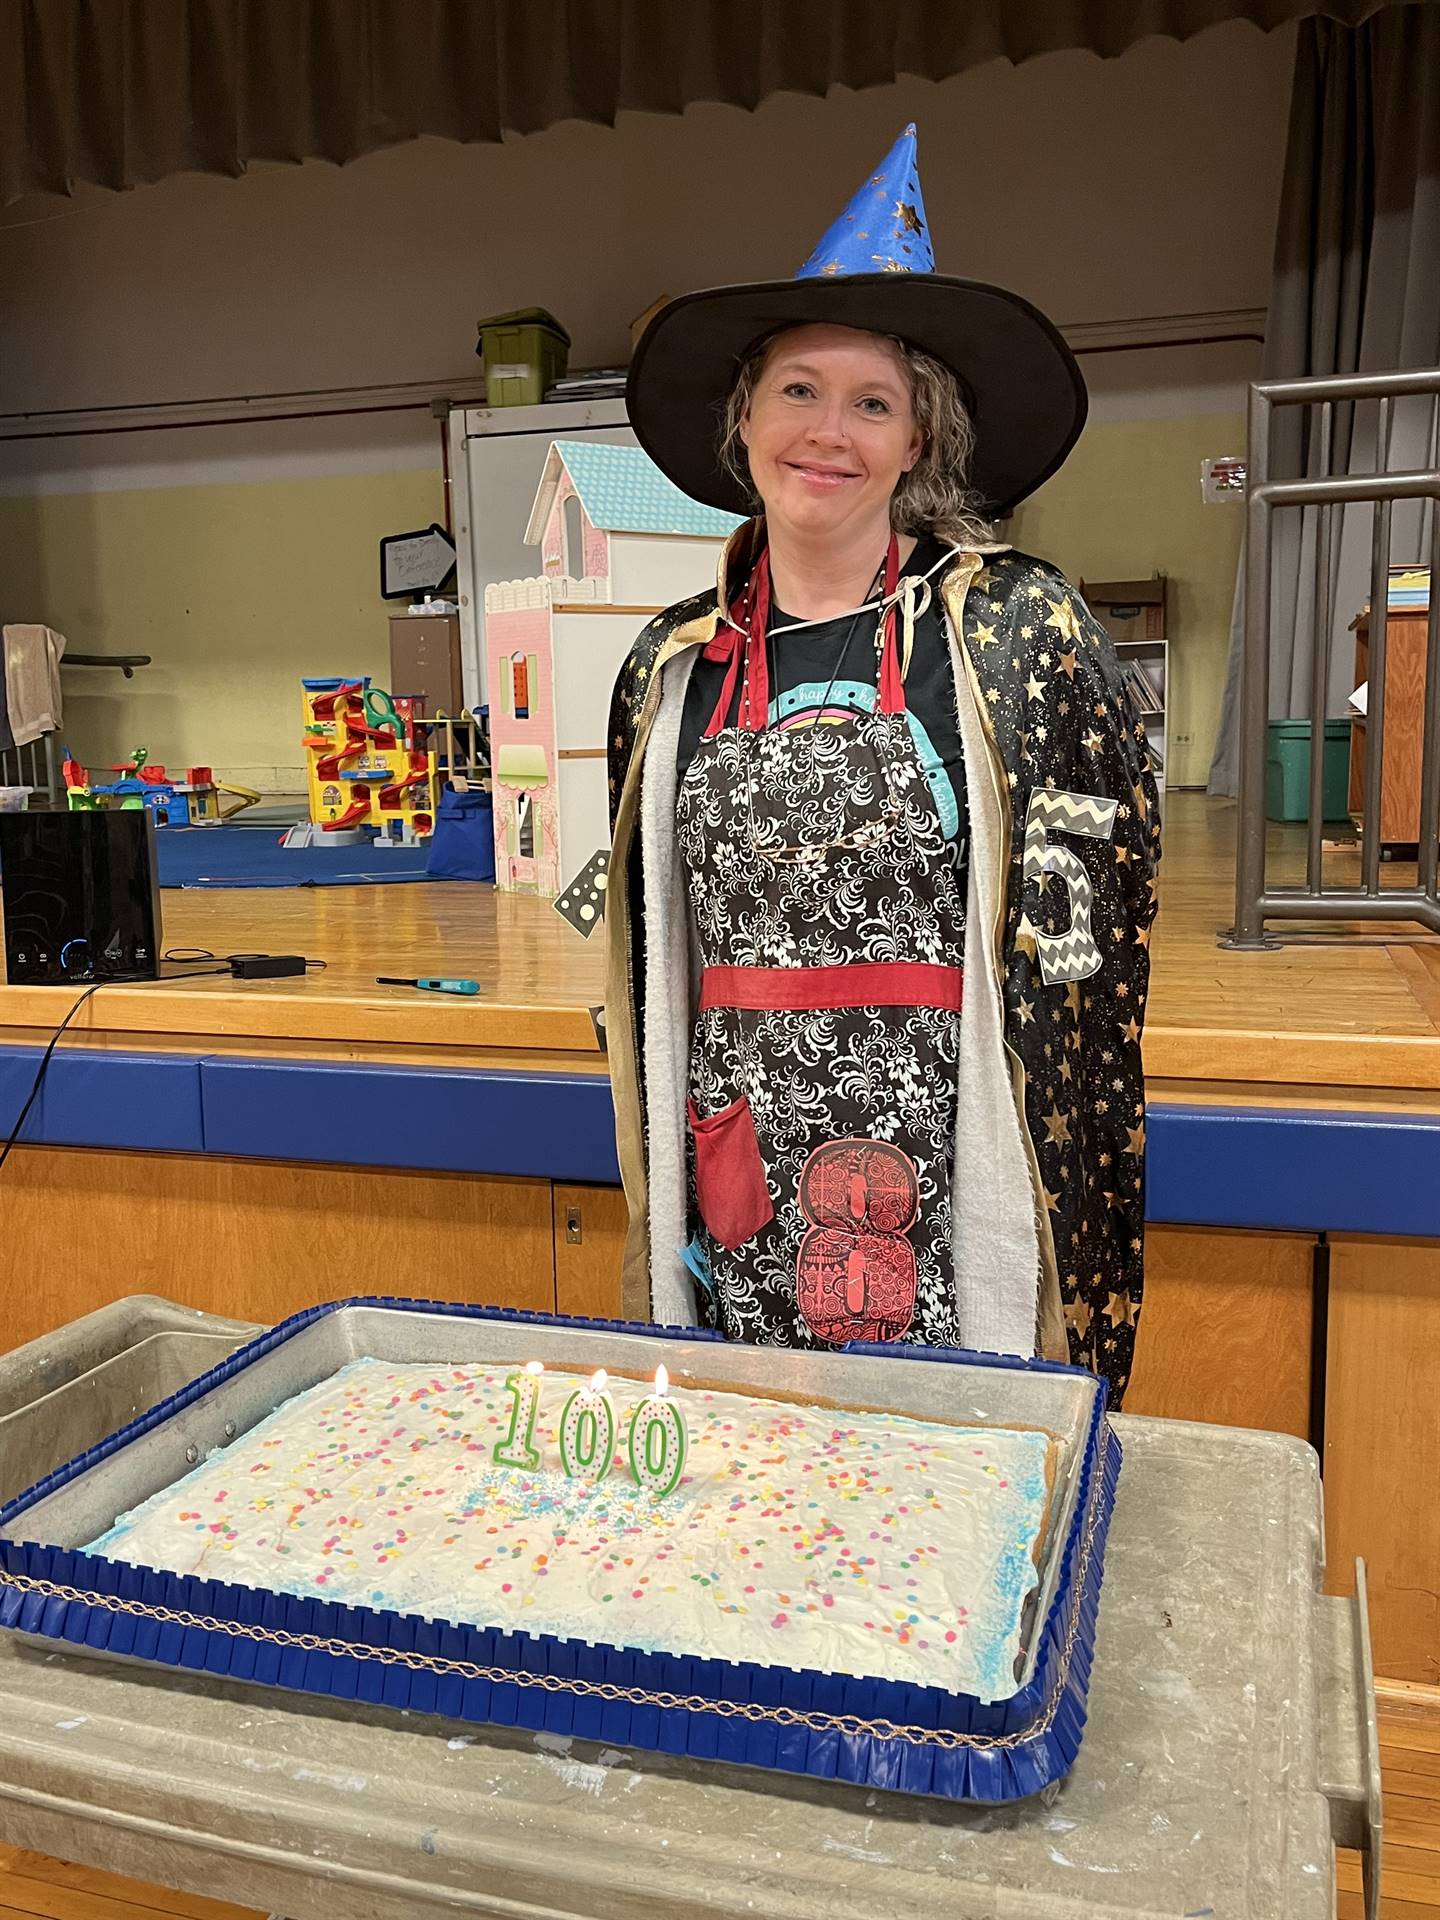 A number wizard next to a cake with 100 candles